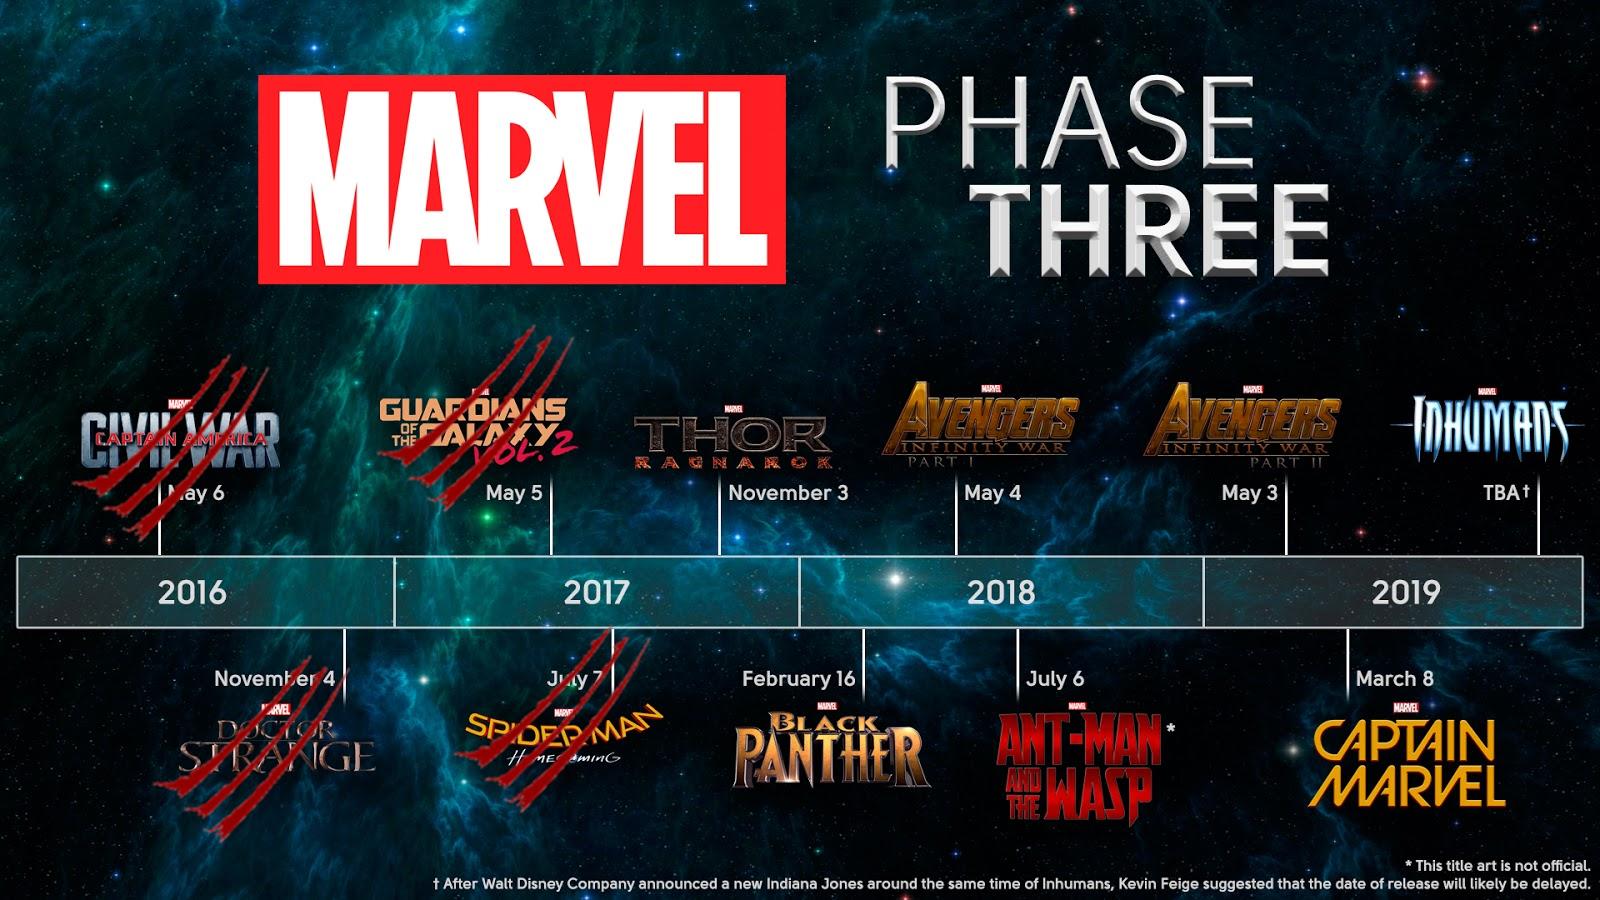 Superheroes Ultimate: Captain Marvel will end Phase 3 MCU